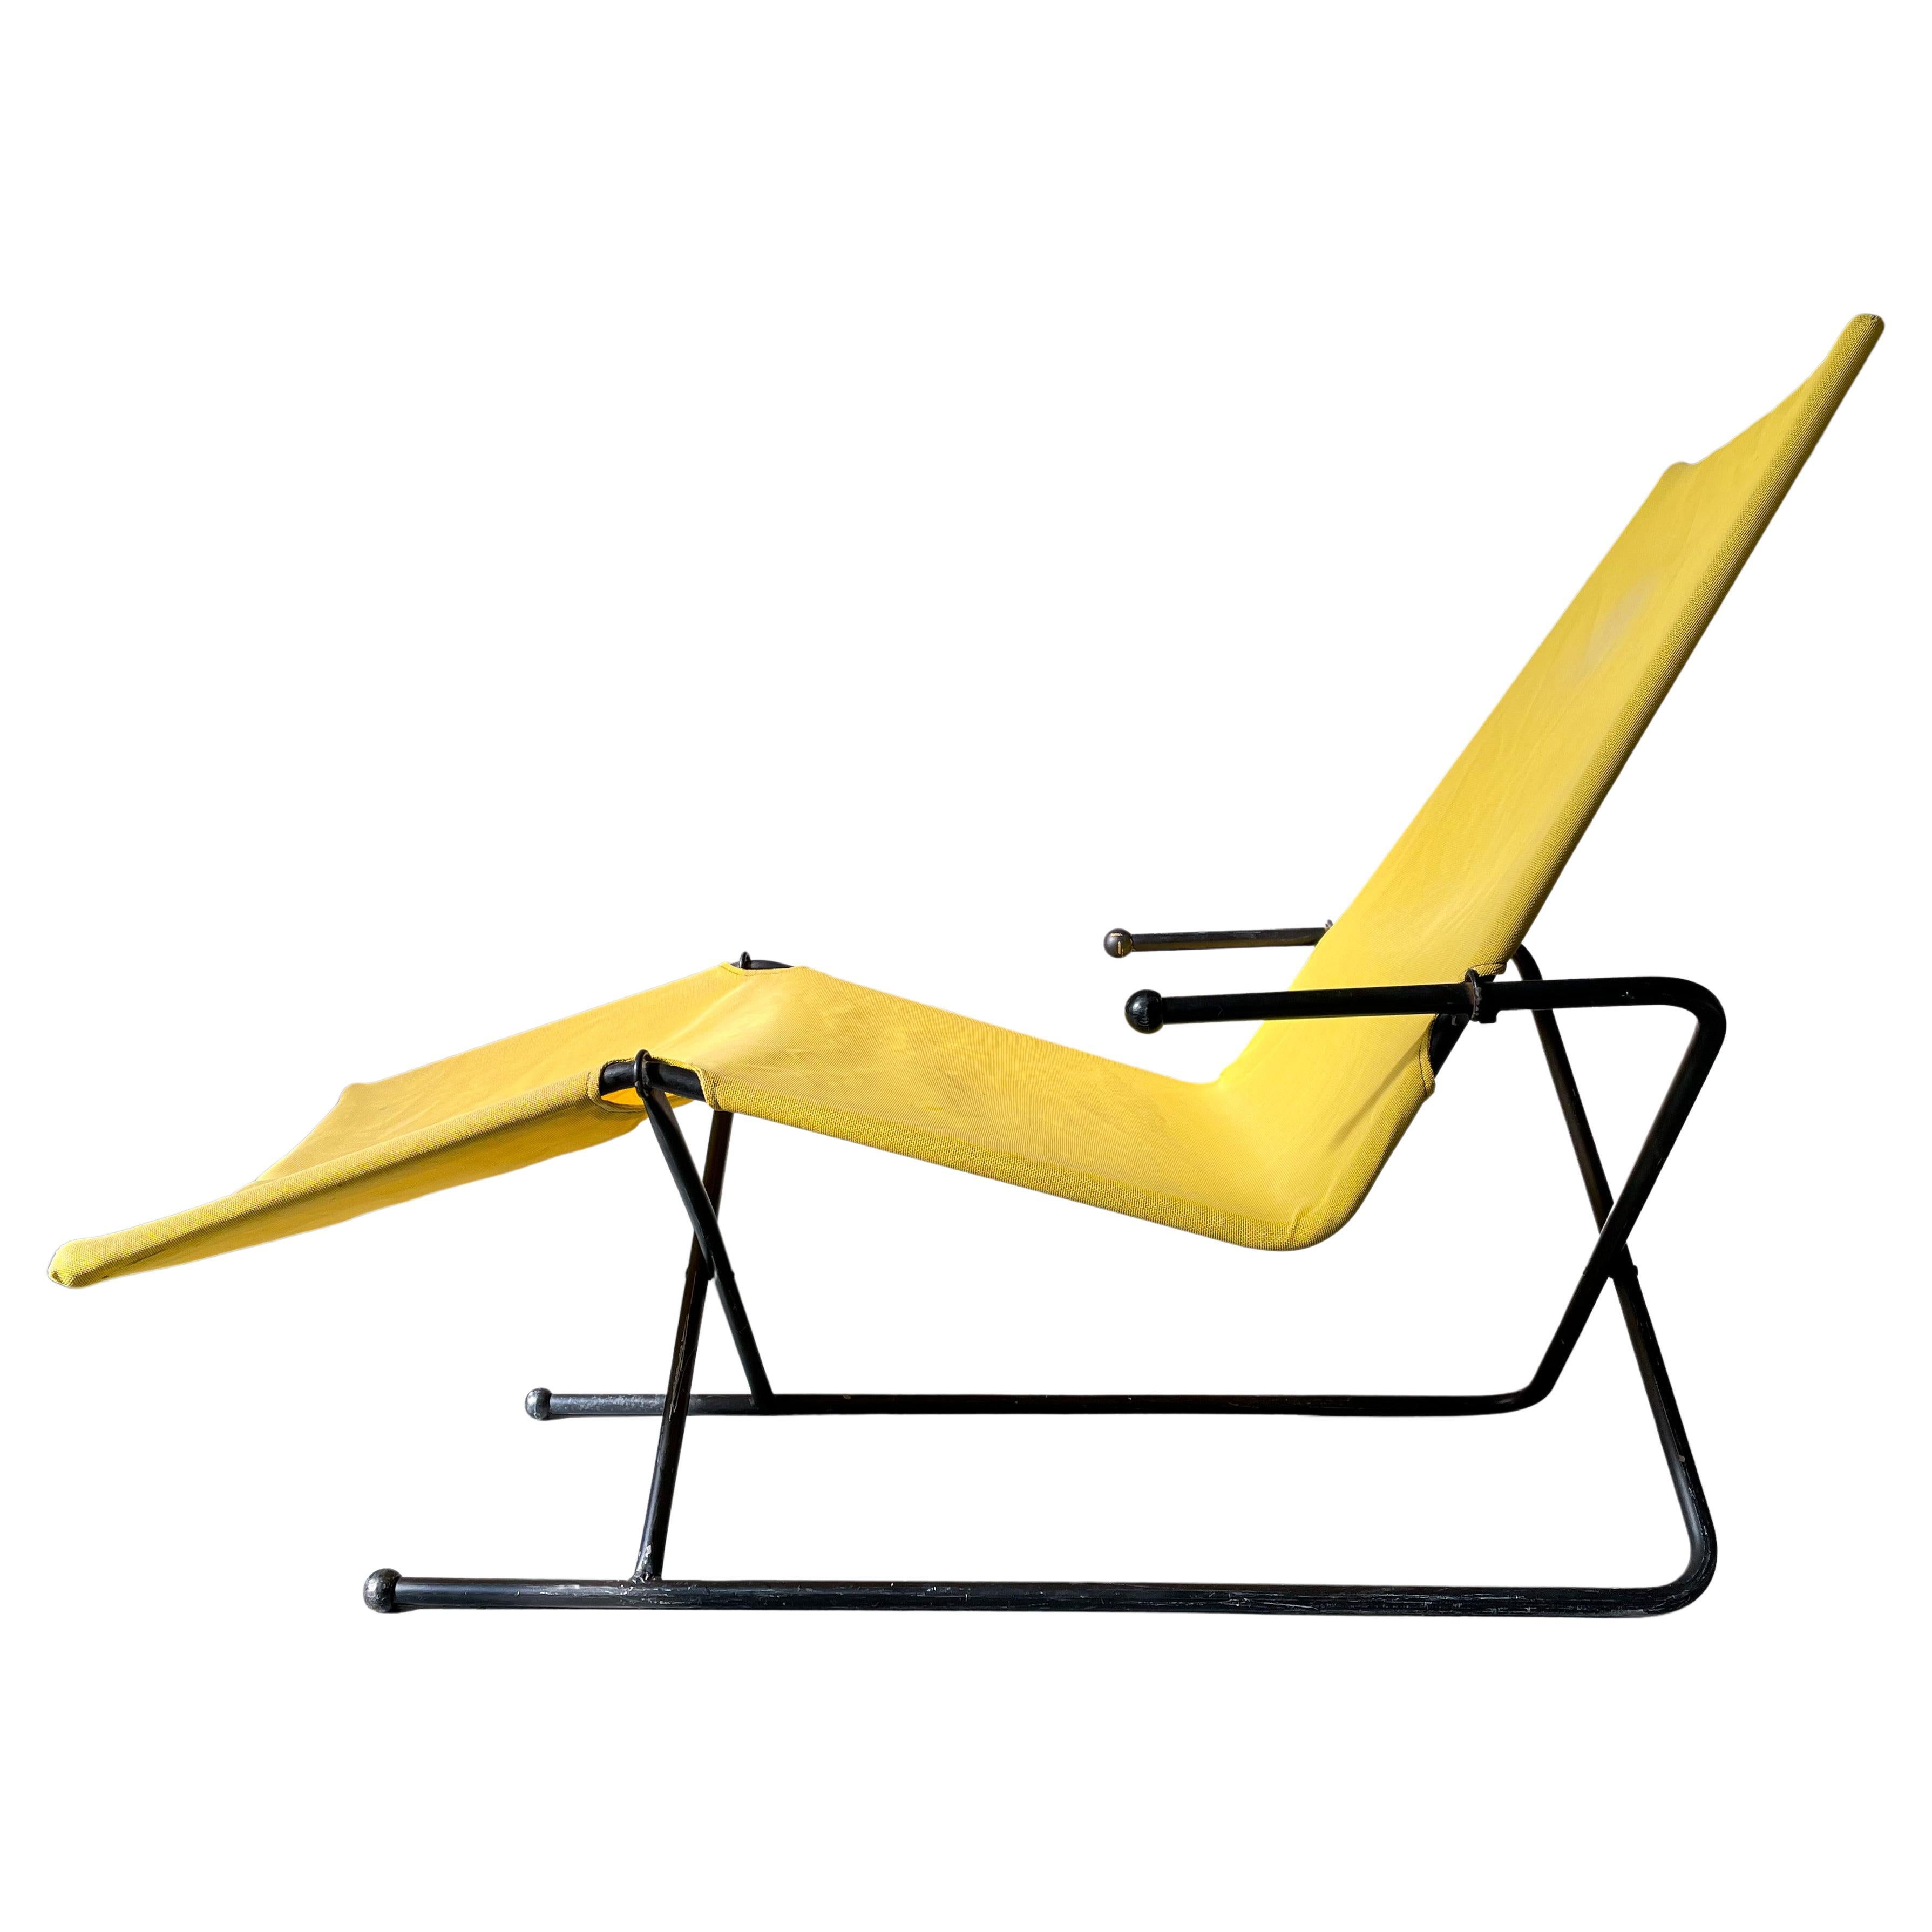 Henry Glass Prototype "Sling-Line" Folding Chaise For Sale